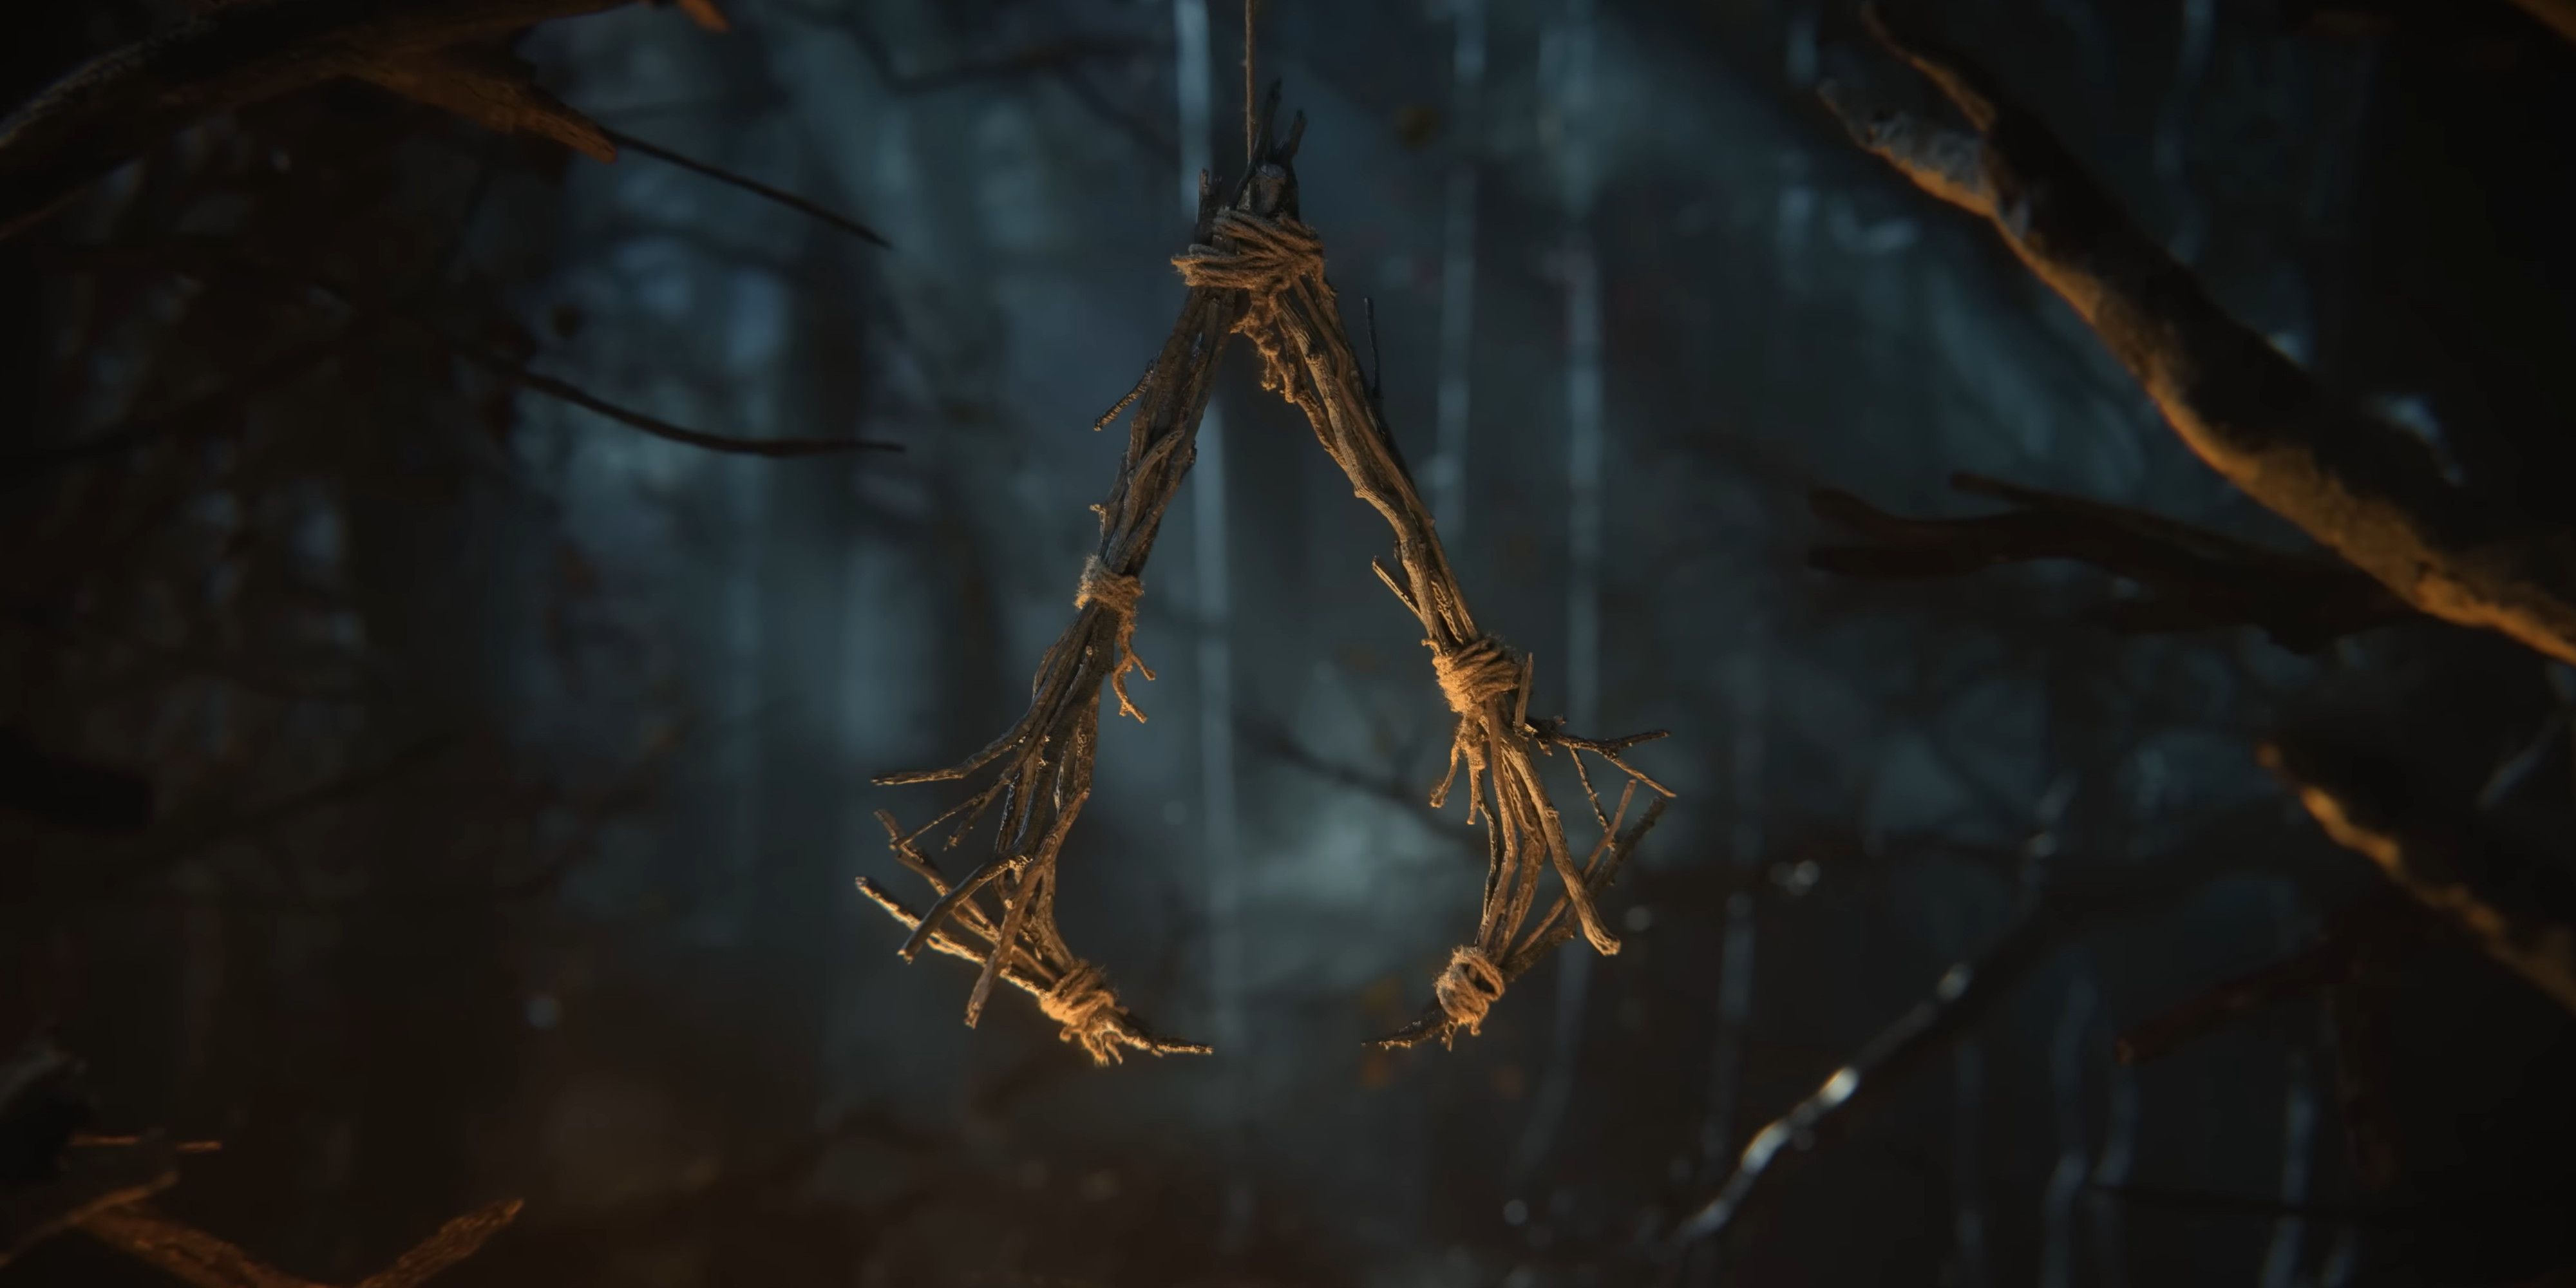 A wooden idol hanging from a tree branch in a dark forest